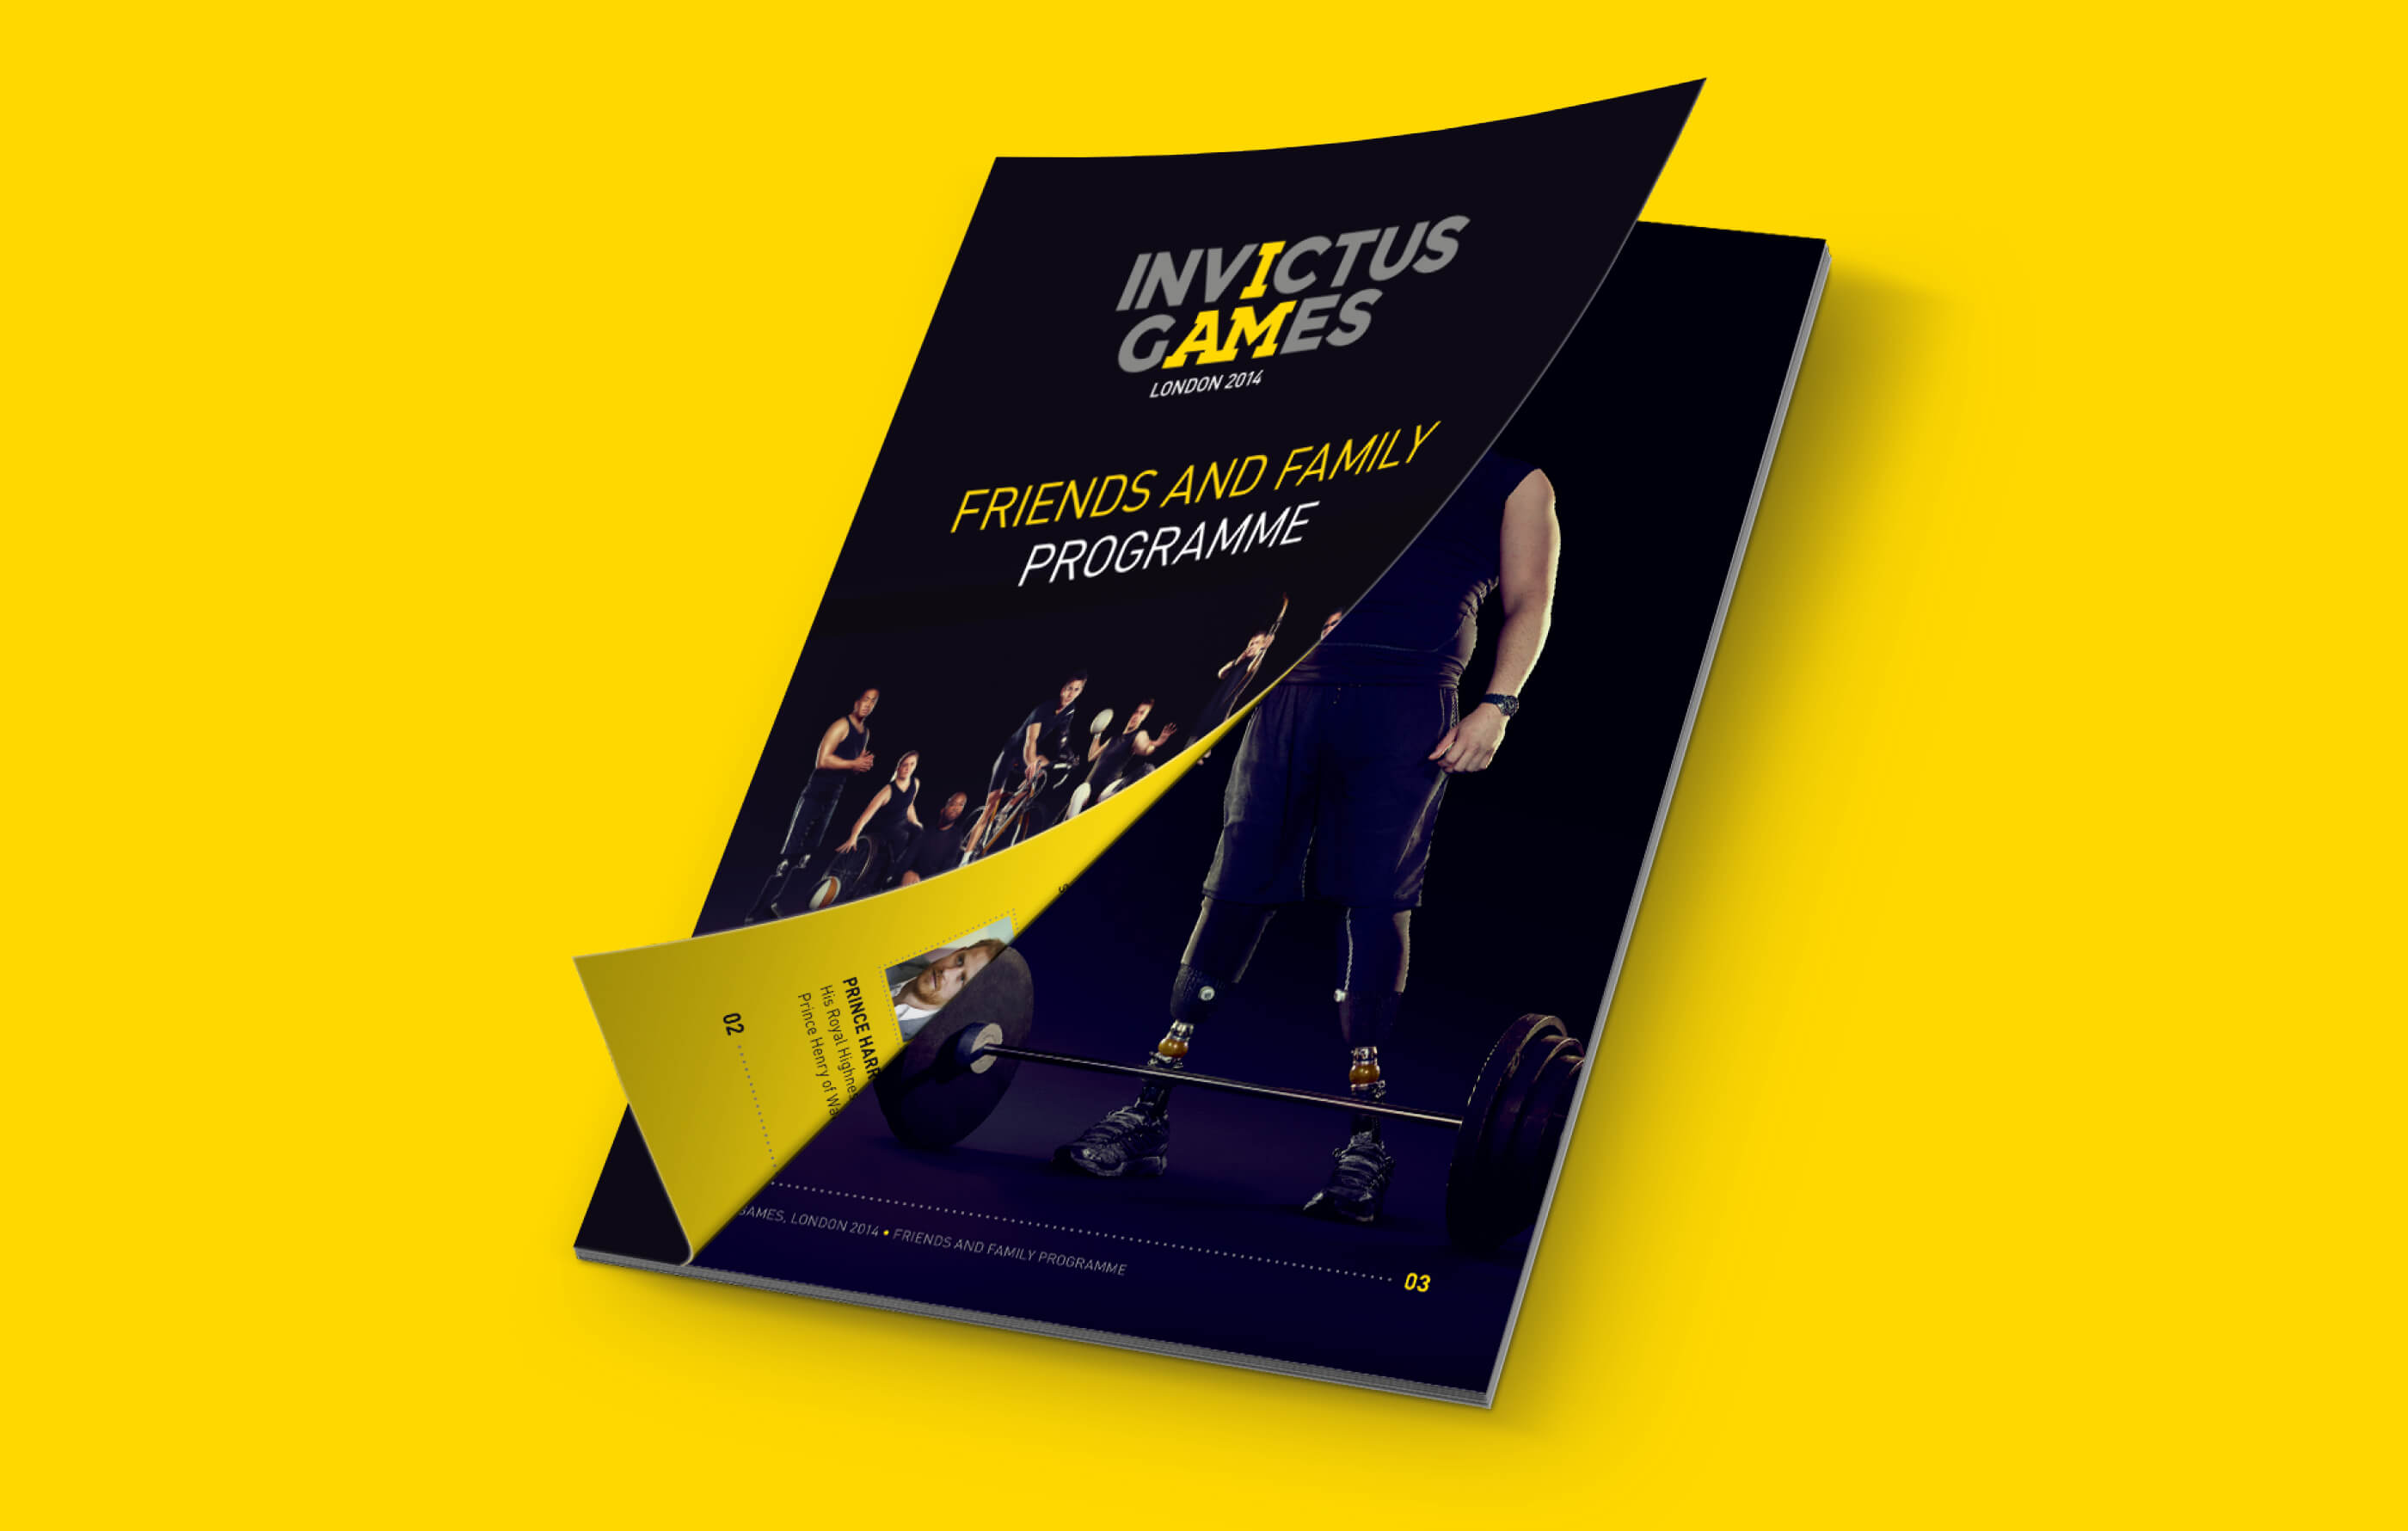 Partially opened front cover of the Invictus Games friends and family booklet on a yellow background